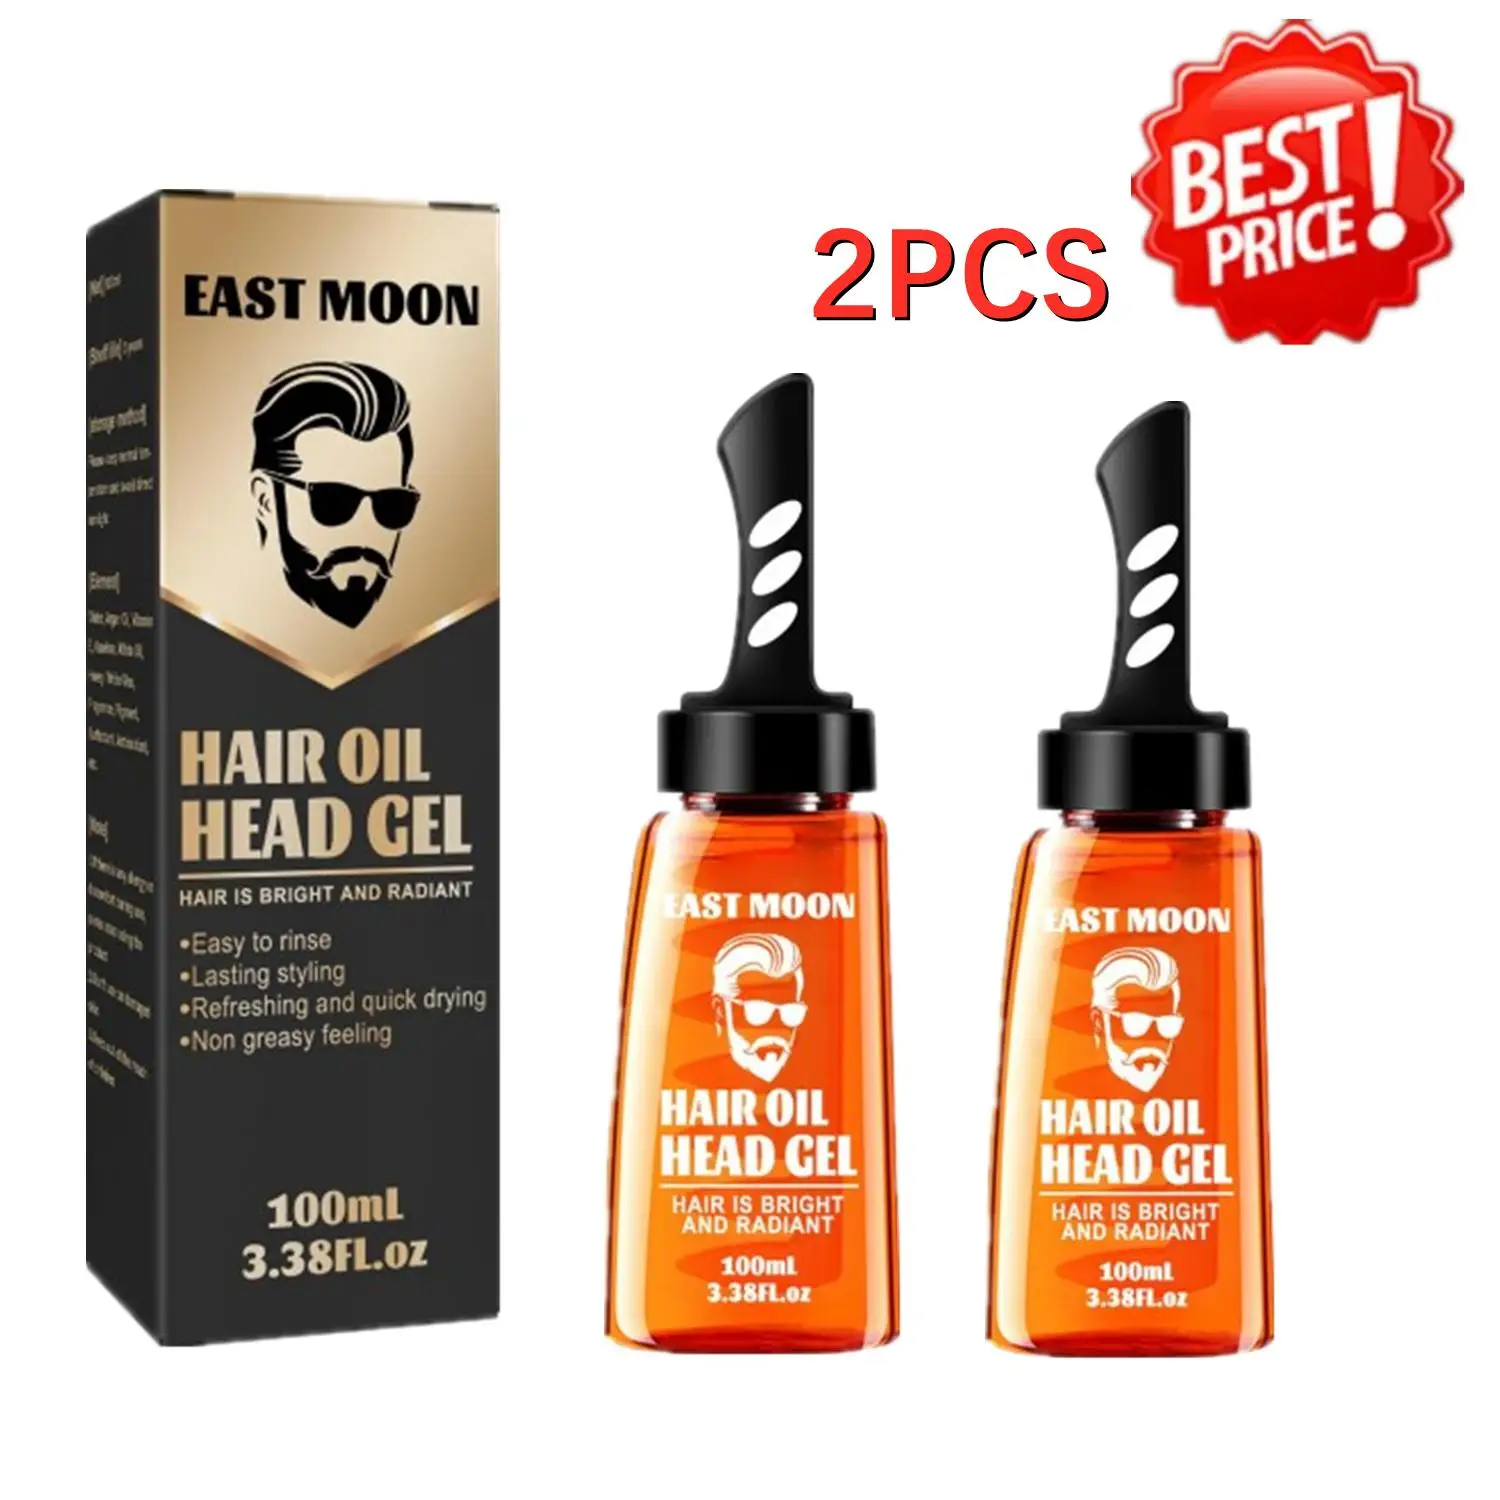 2pcs Men Hair Wax Gel With Comb Lasting Hold Cream Drying Hair Gel Oil Pomade Styling Hair Hair Oil Quick Fluffy Wax 100ML accessories toilet seat hinge top close hinge pair replacement soft release quick stainless steel 2pcs durable